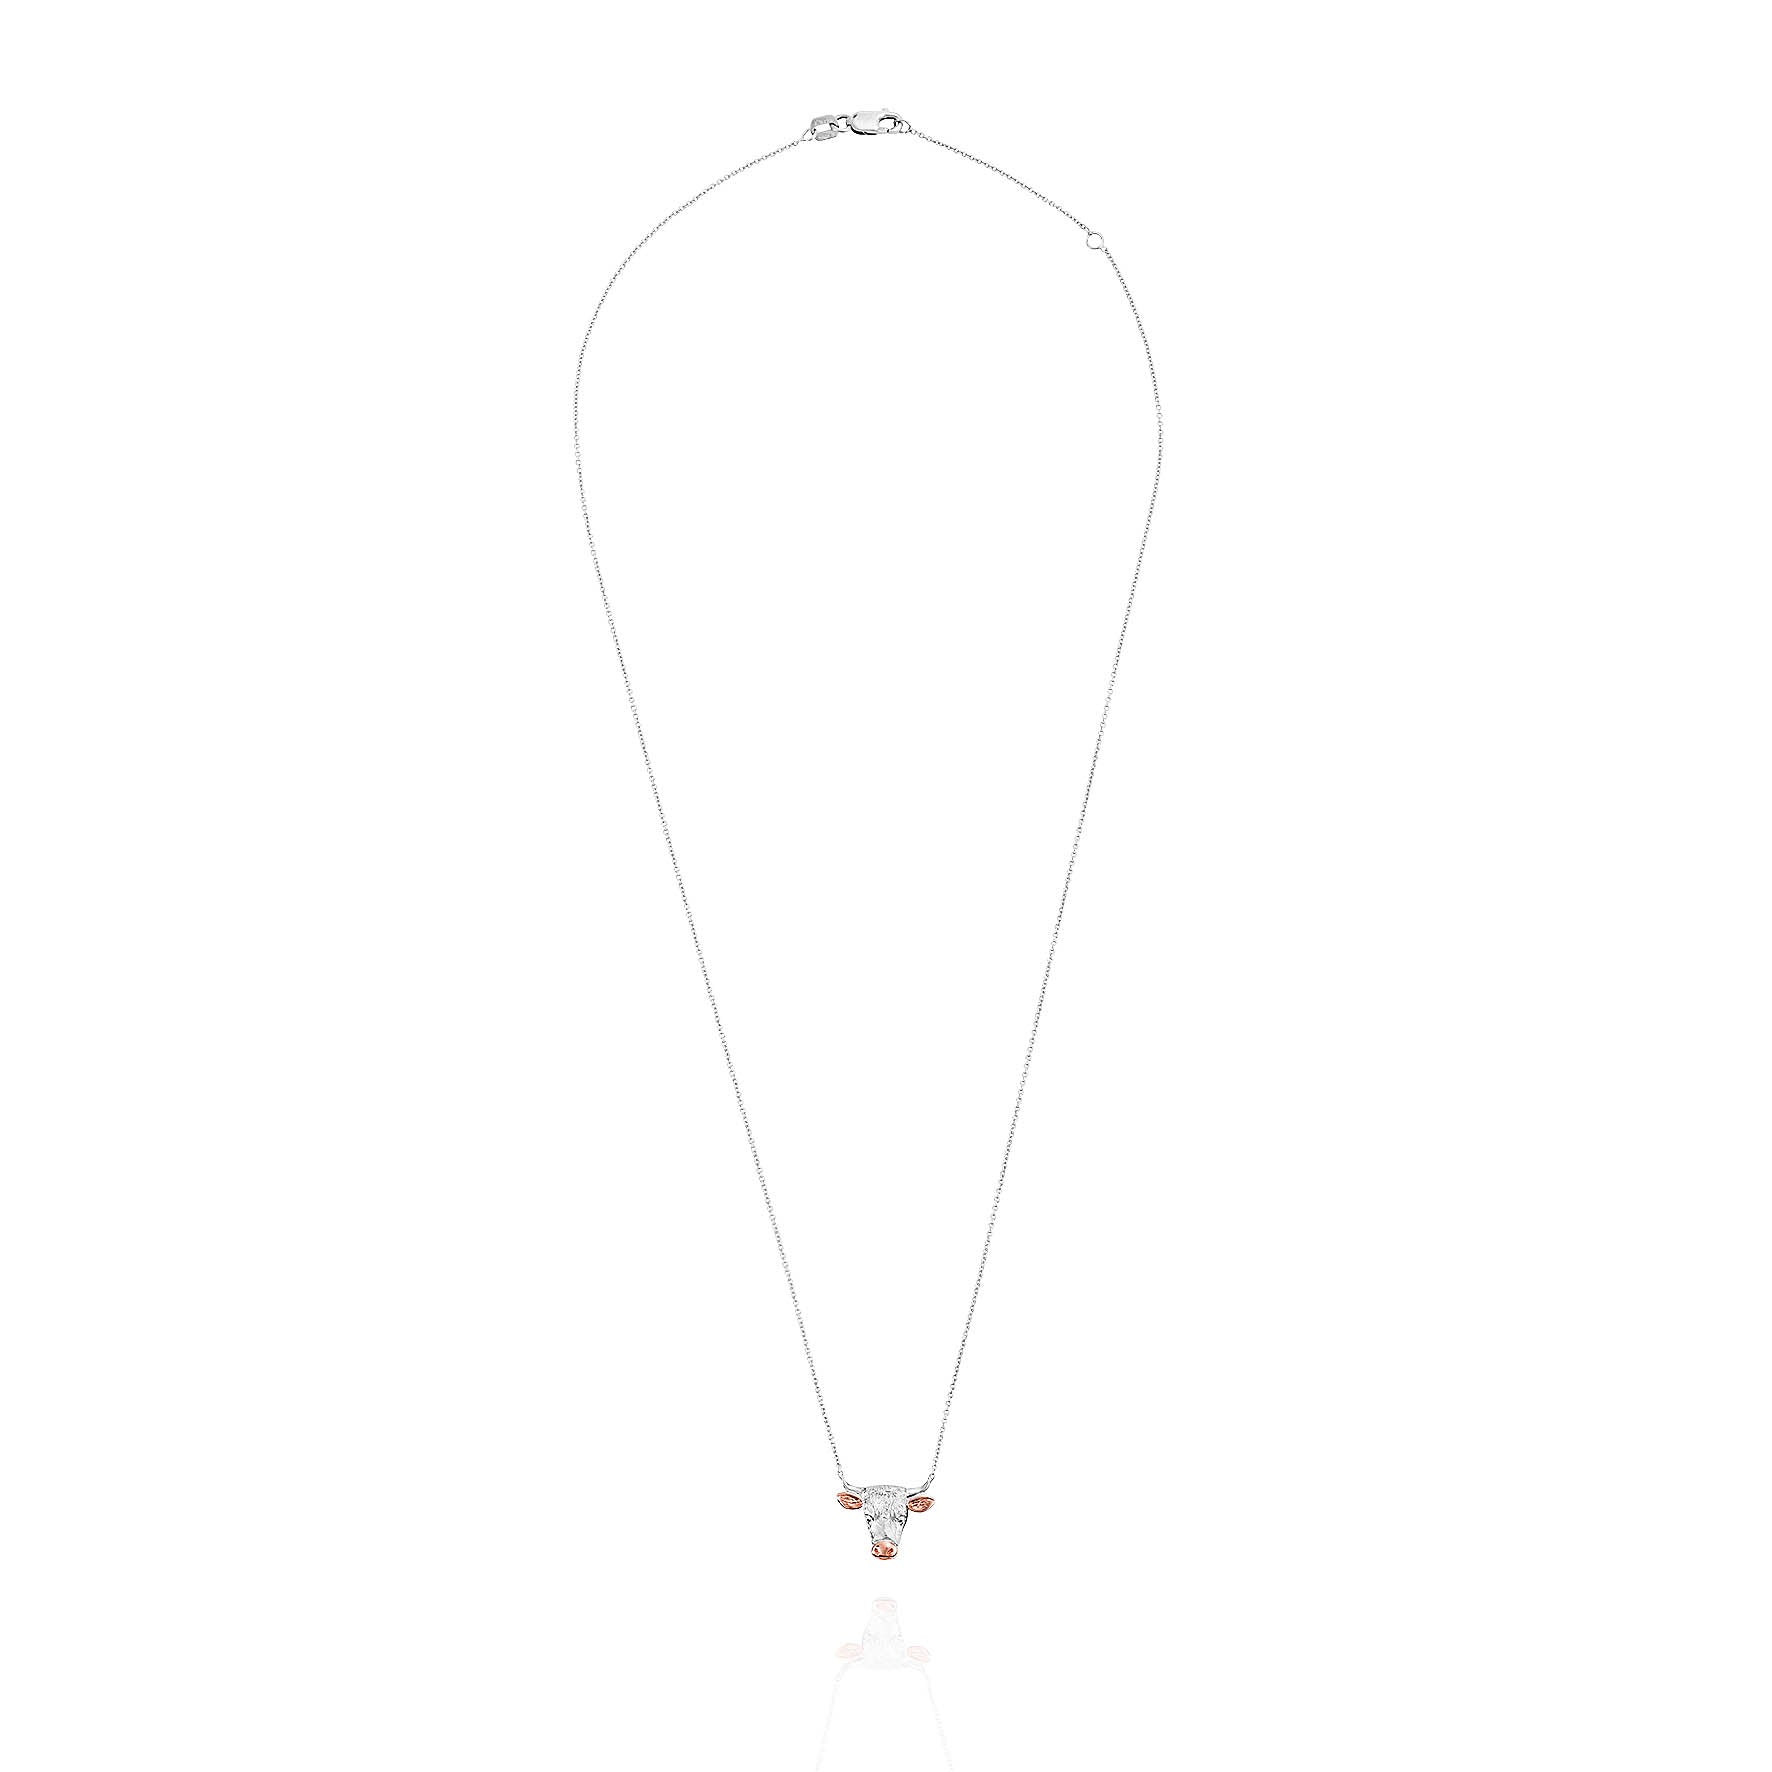 Hereford Pendant in Two Tone 18 ct White and Rose Gold 